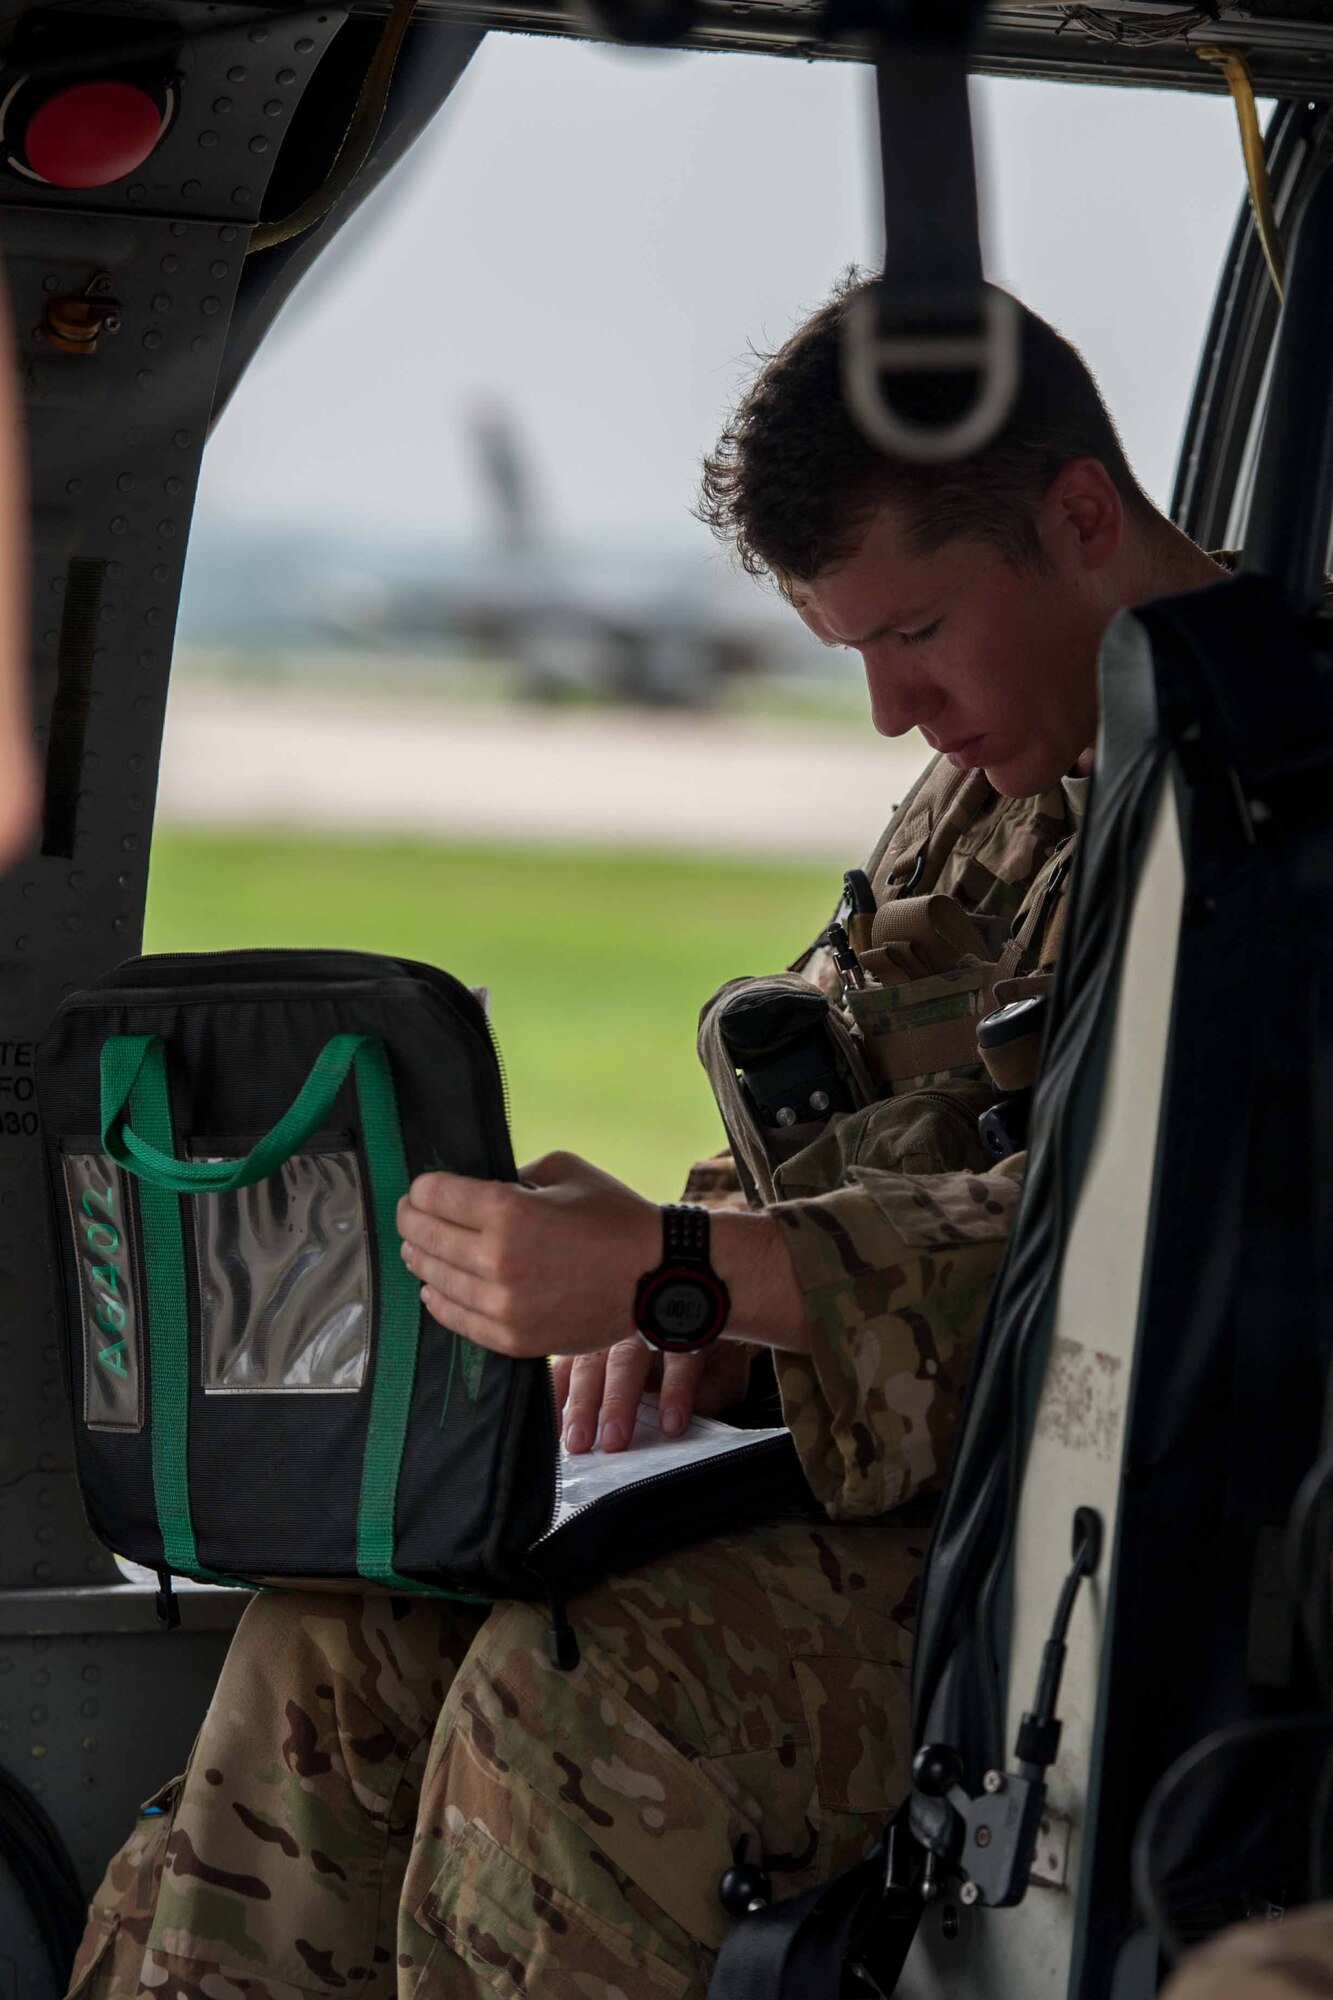 Staff Sgt. Joe Arriza, 33rd Rescue Squadron aerial gunner, looks over a preflight checklist before a combat search and rescue scenario during Exercise Pacific Thunder 16-2 at Osan Air Base, Republic of Korea, July 13, 2016. The 33rd RQS is at Osan to participate in Pacific Thunder, the largest combat search and rescue exercise in the Pacific. (U.S. Air Force photo by Staff Sgt. Jonathan Steffen/Released)